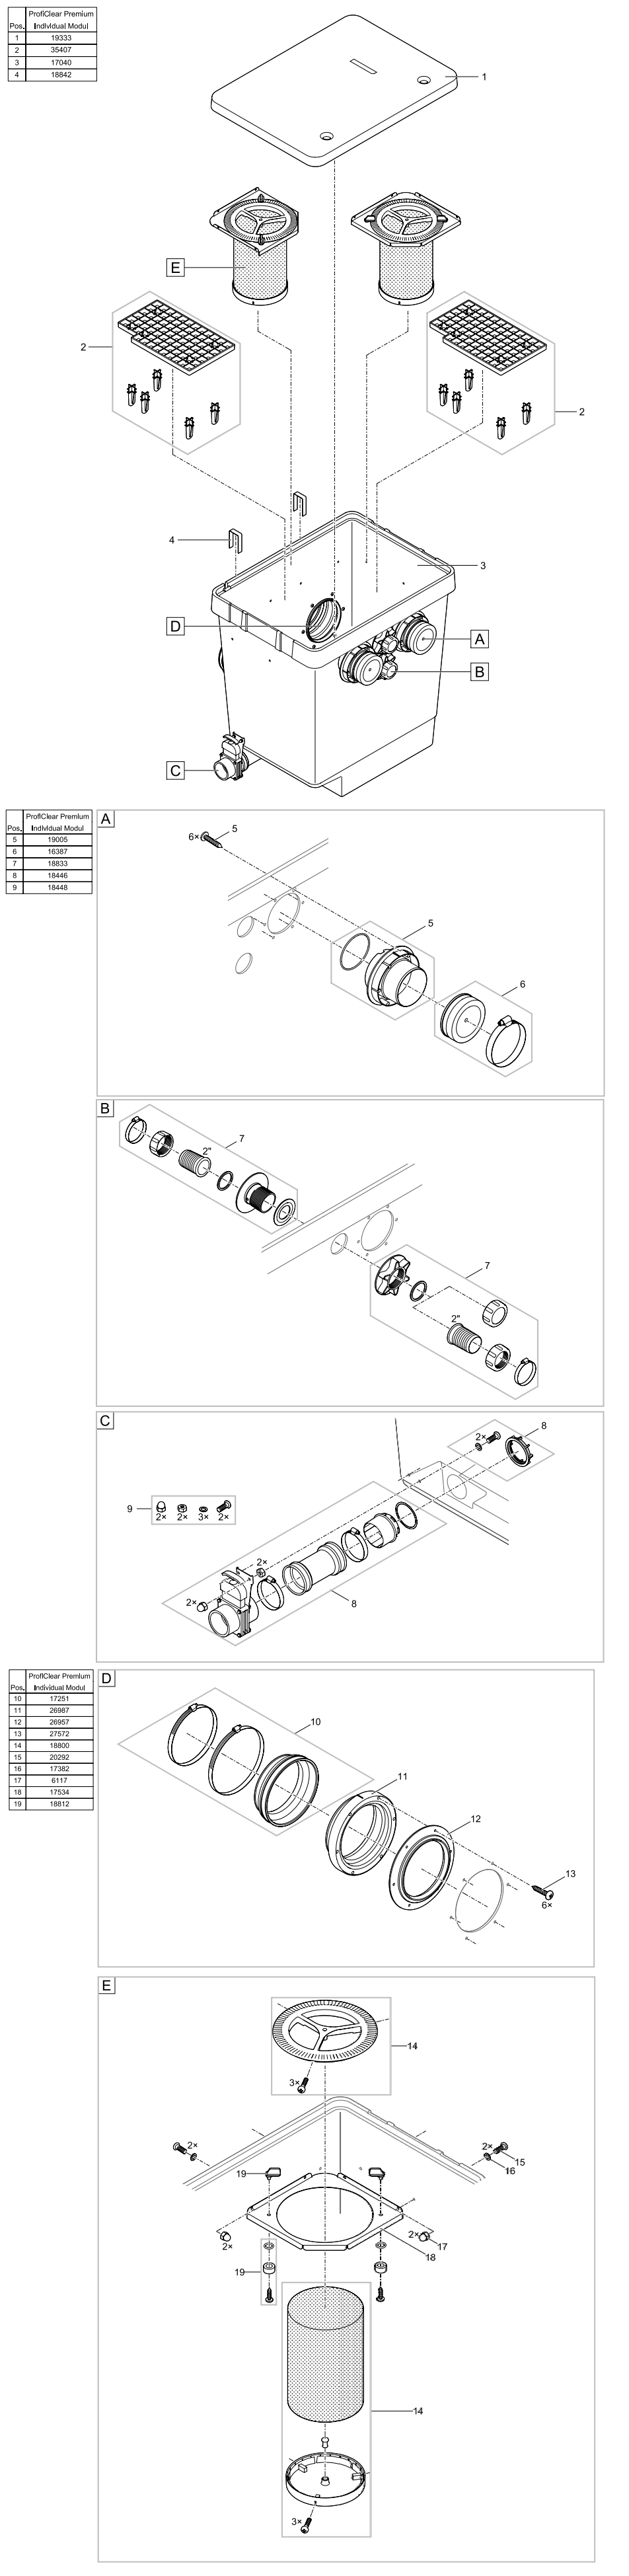 Individual Module L Exploded Diagram and Parts List